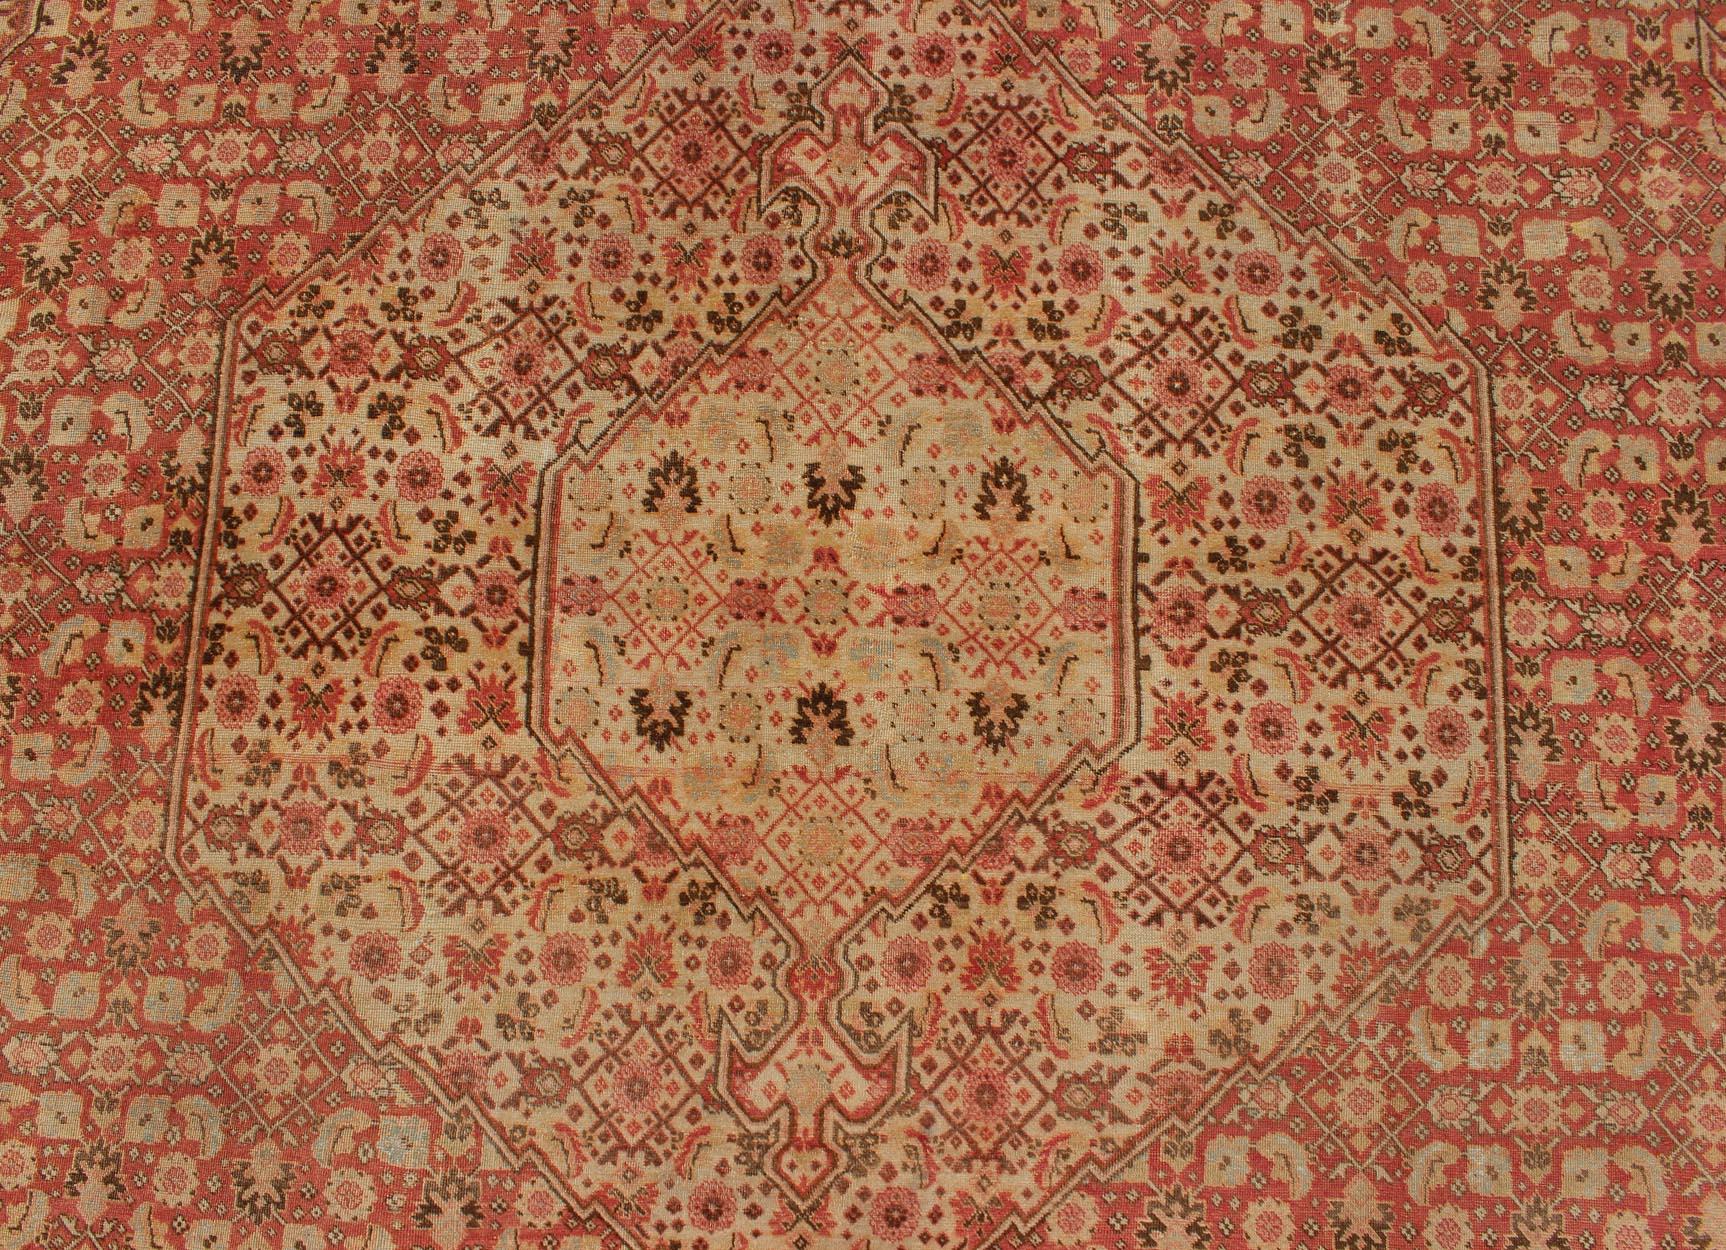 Antique Persian Tabriz Rug with Medallion Design in Coral, Cream and Brown Tones For Sale 6